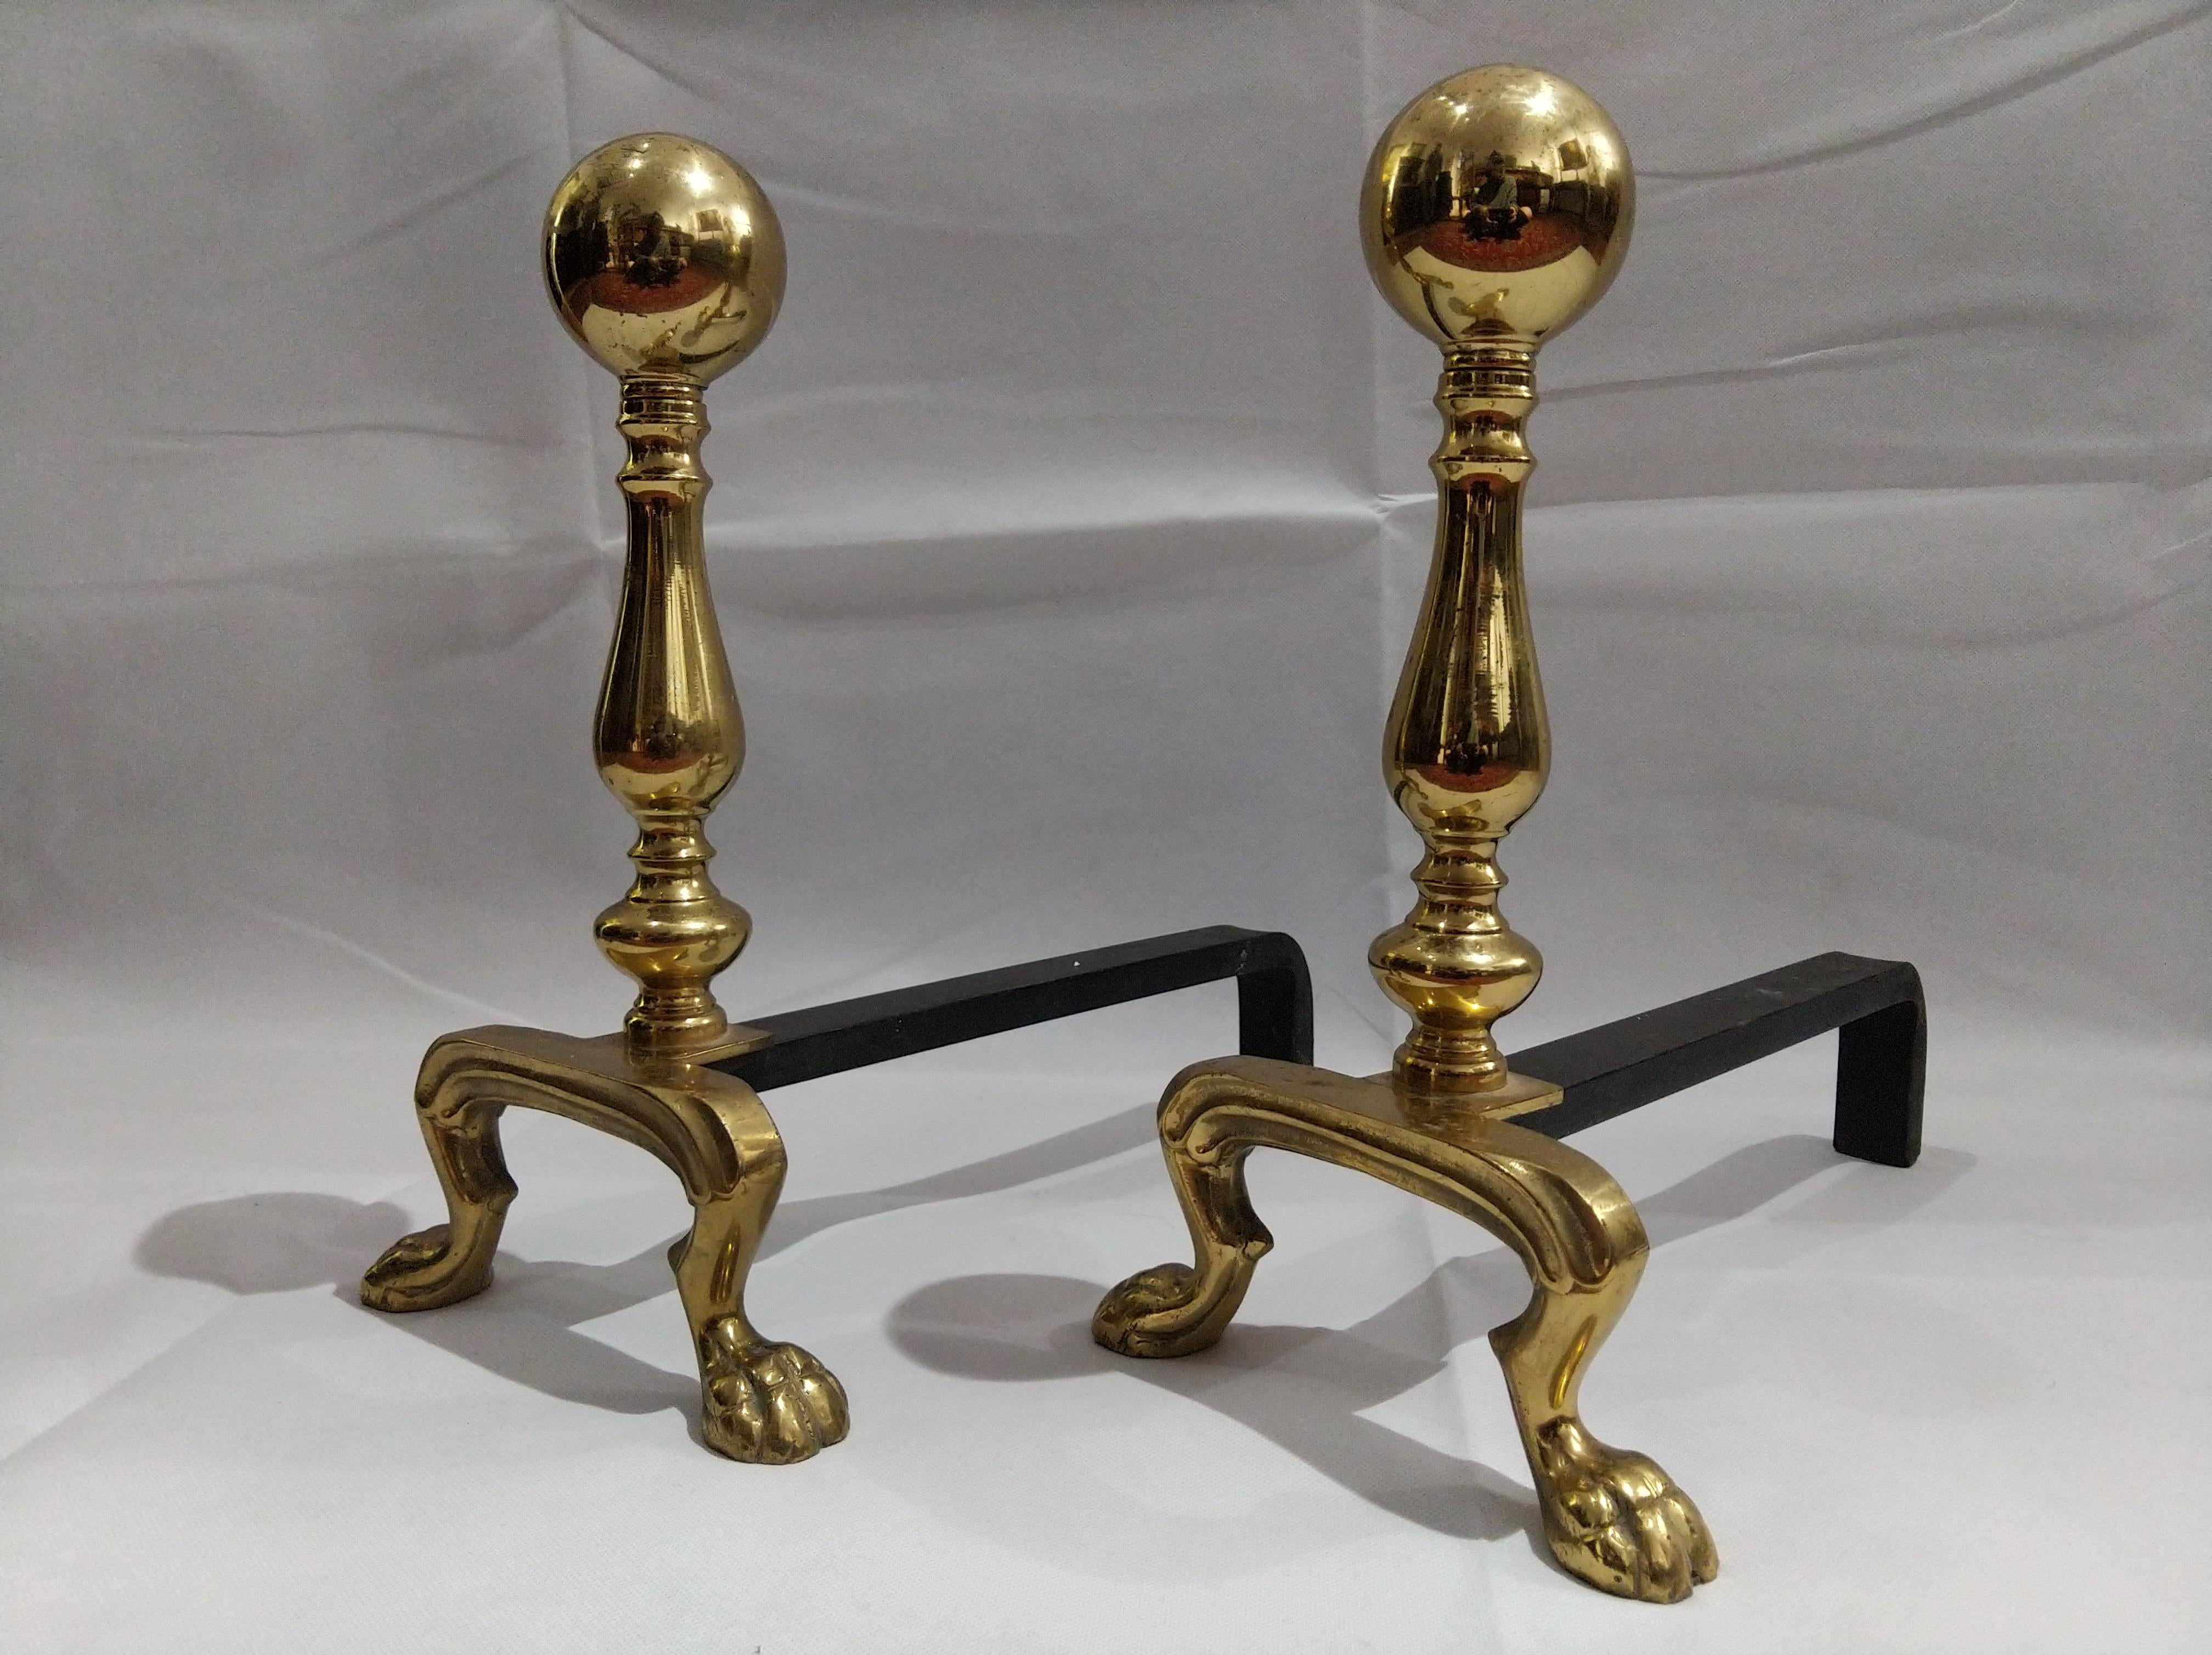 Pair of Early 19th century Empire polished brass and iron andirons with lion's feet.

The Empire style is an early-nineteenth-century design movement in architecture, furniture, other decorative arts, and the visual arts, representing the second